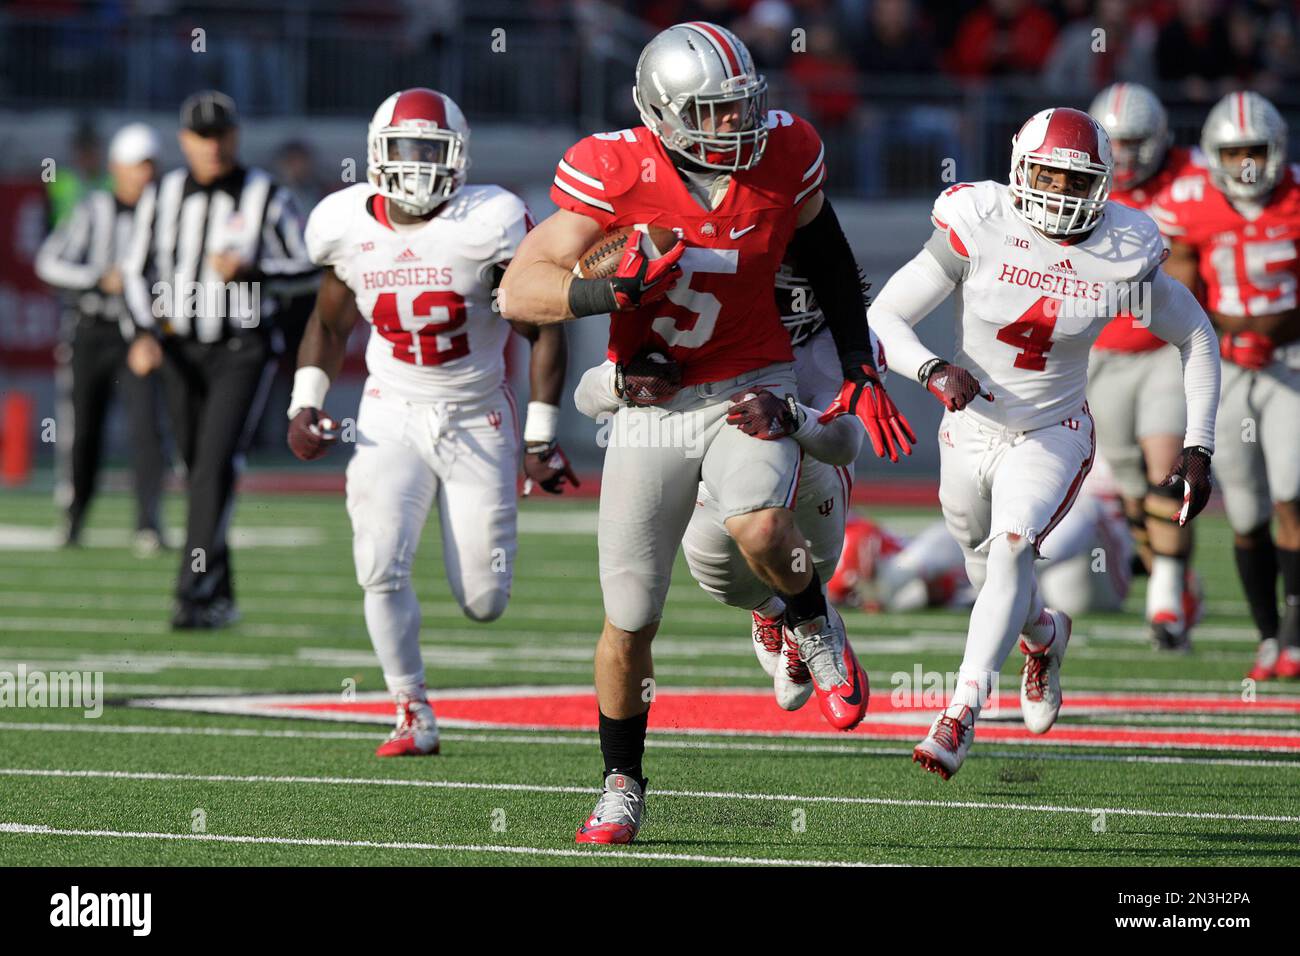 Ohio State tight end Jeff Heuerman plays against Indiana in an NCAA ...